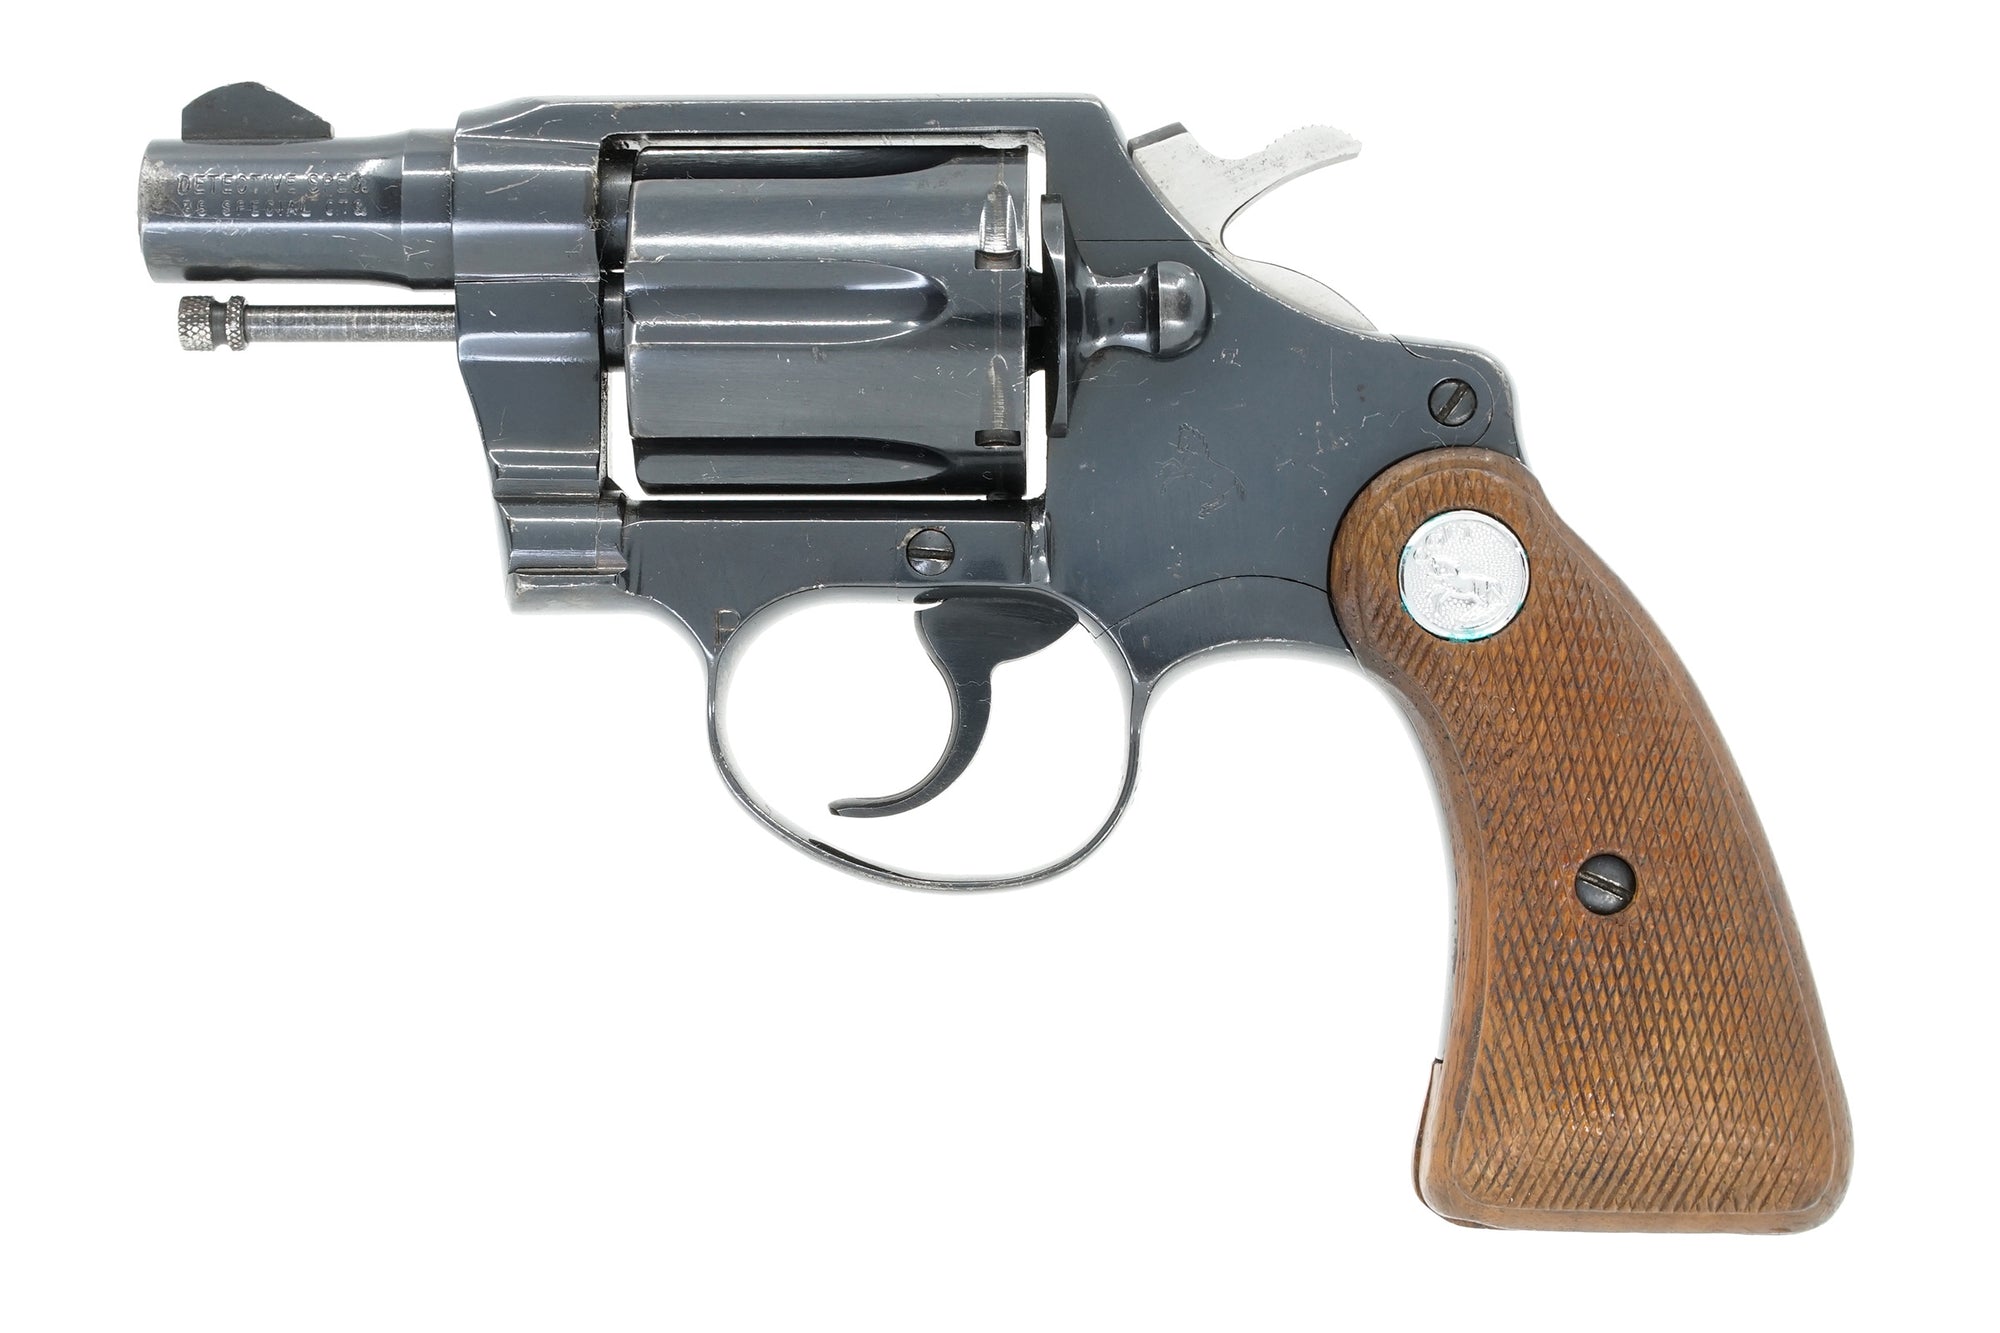 Colt Detective Special 38 SN:B03318 MFG:1970 - Letterkenny Army Depot